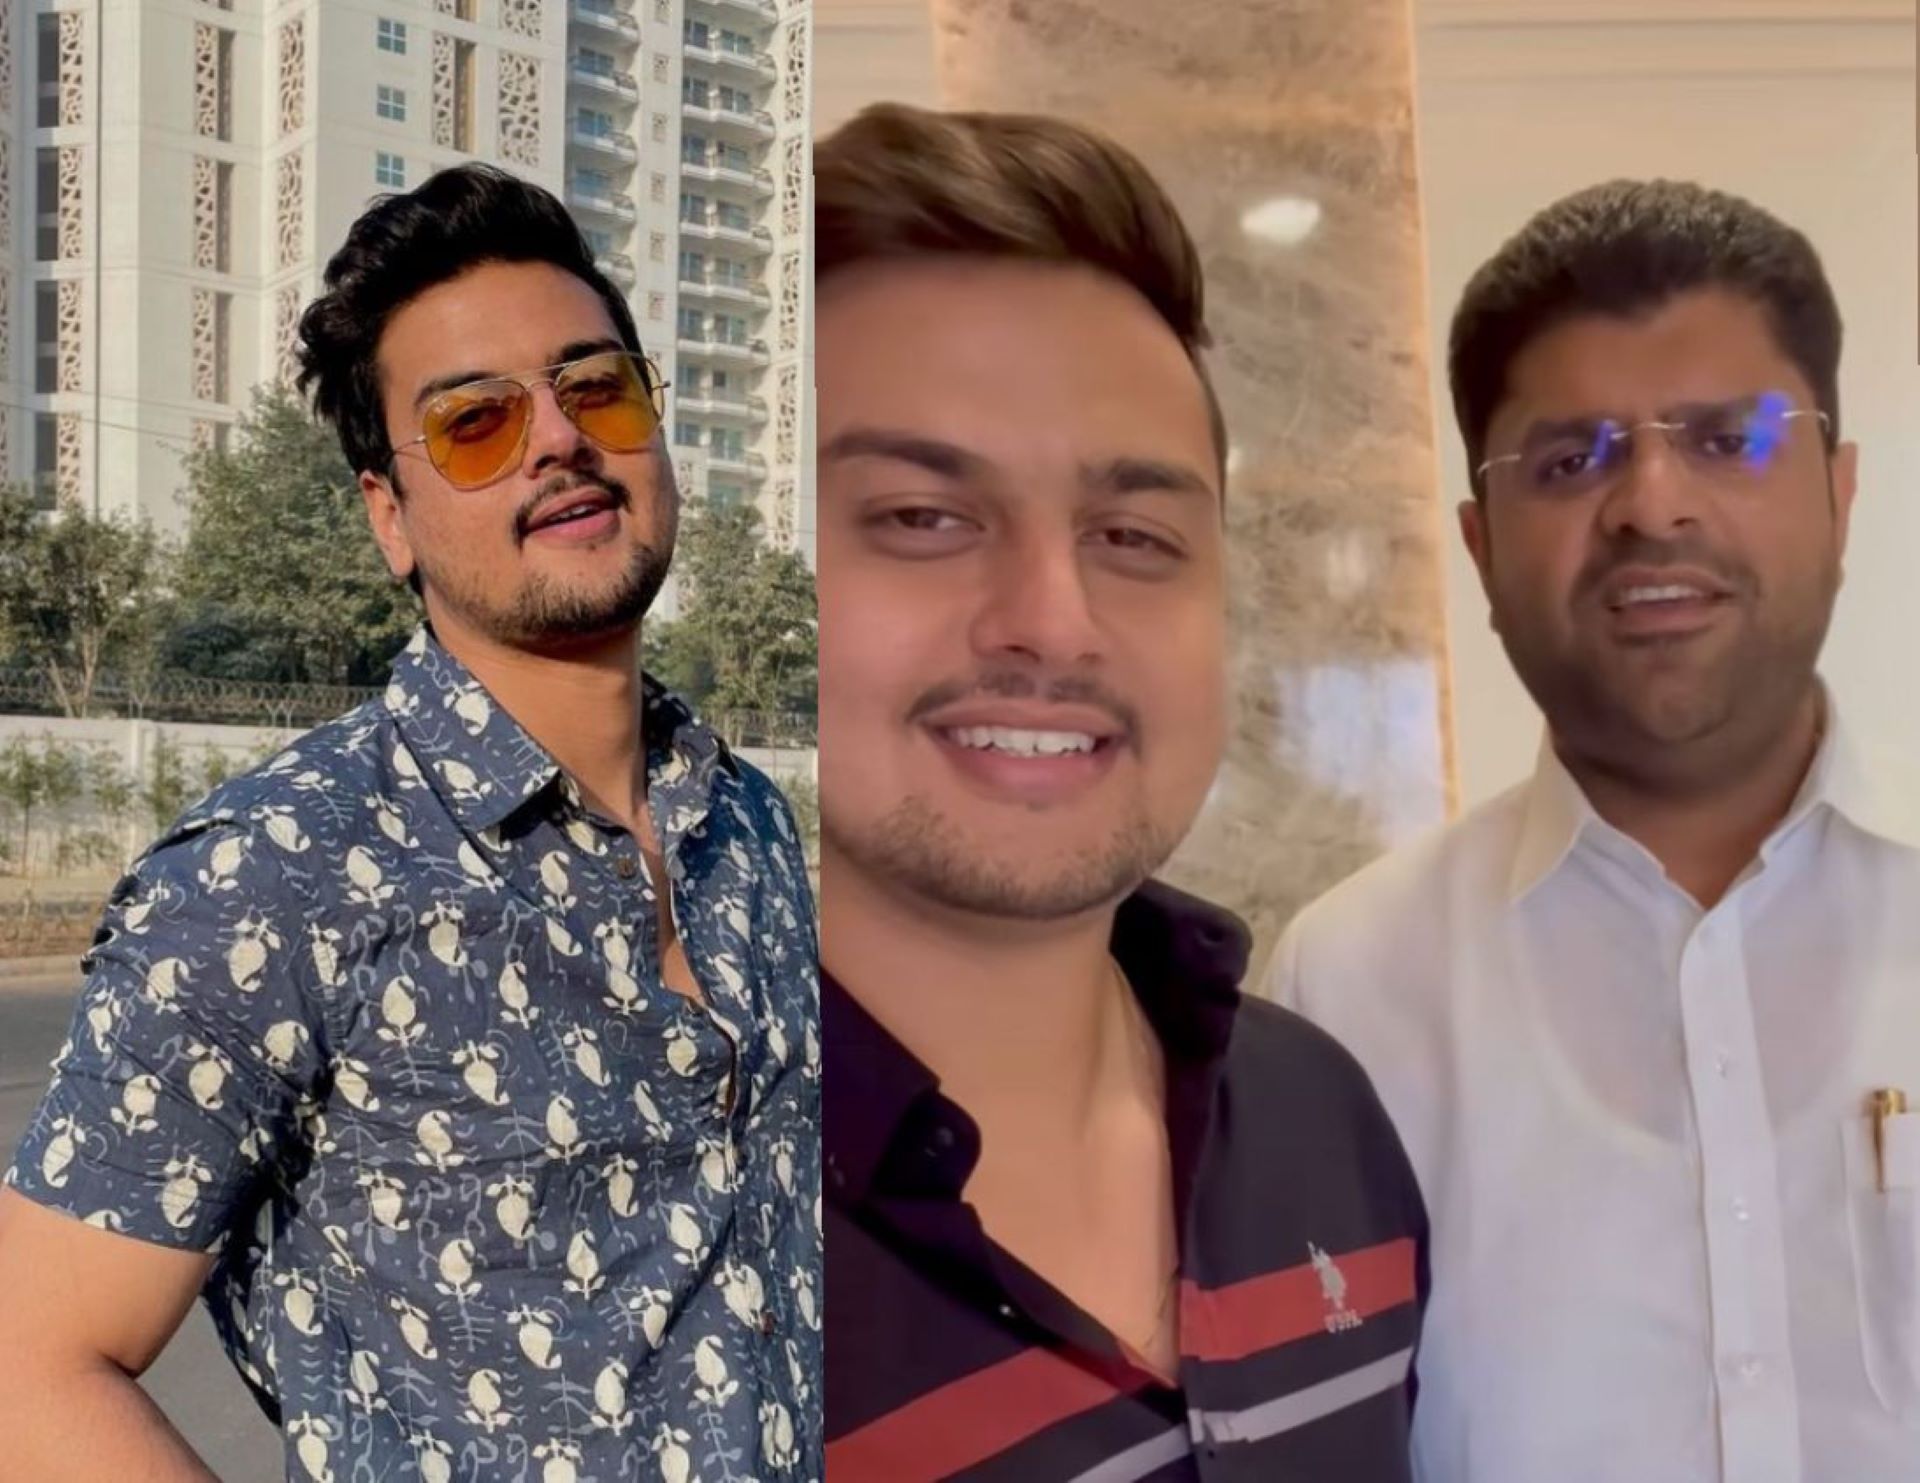 Haryana YouTuber's Mimicry of Dushyant Chautala Goes Viral, Draws Former Deputy CM's Attention